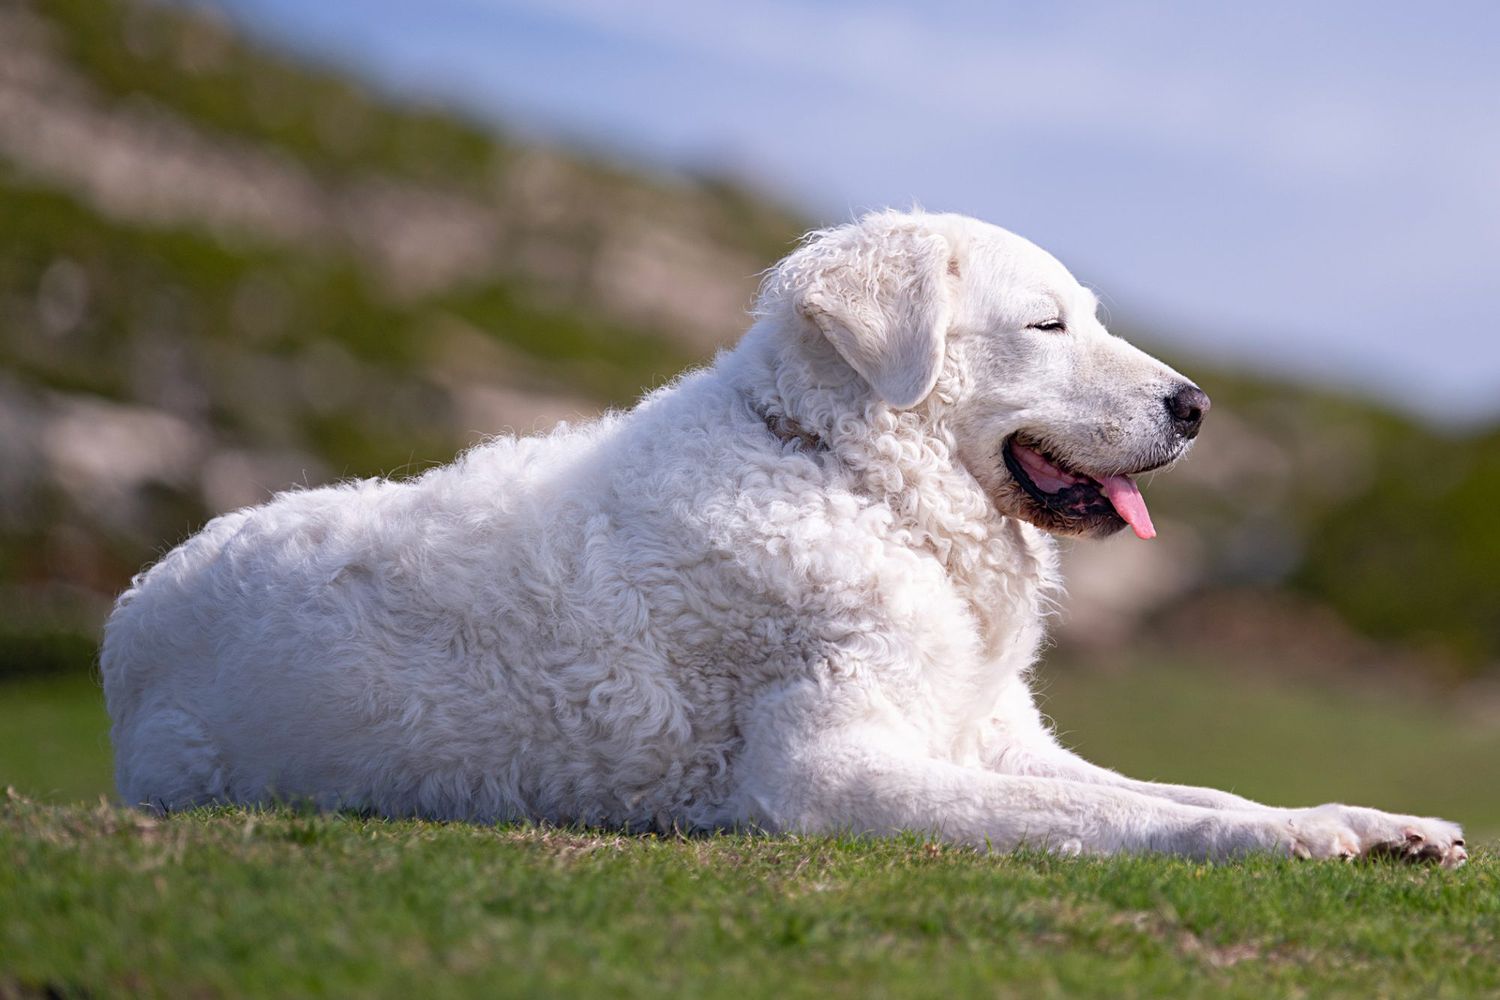 kuvasz dog lying down in the grass with his tongue out